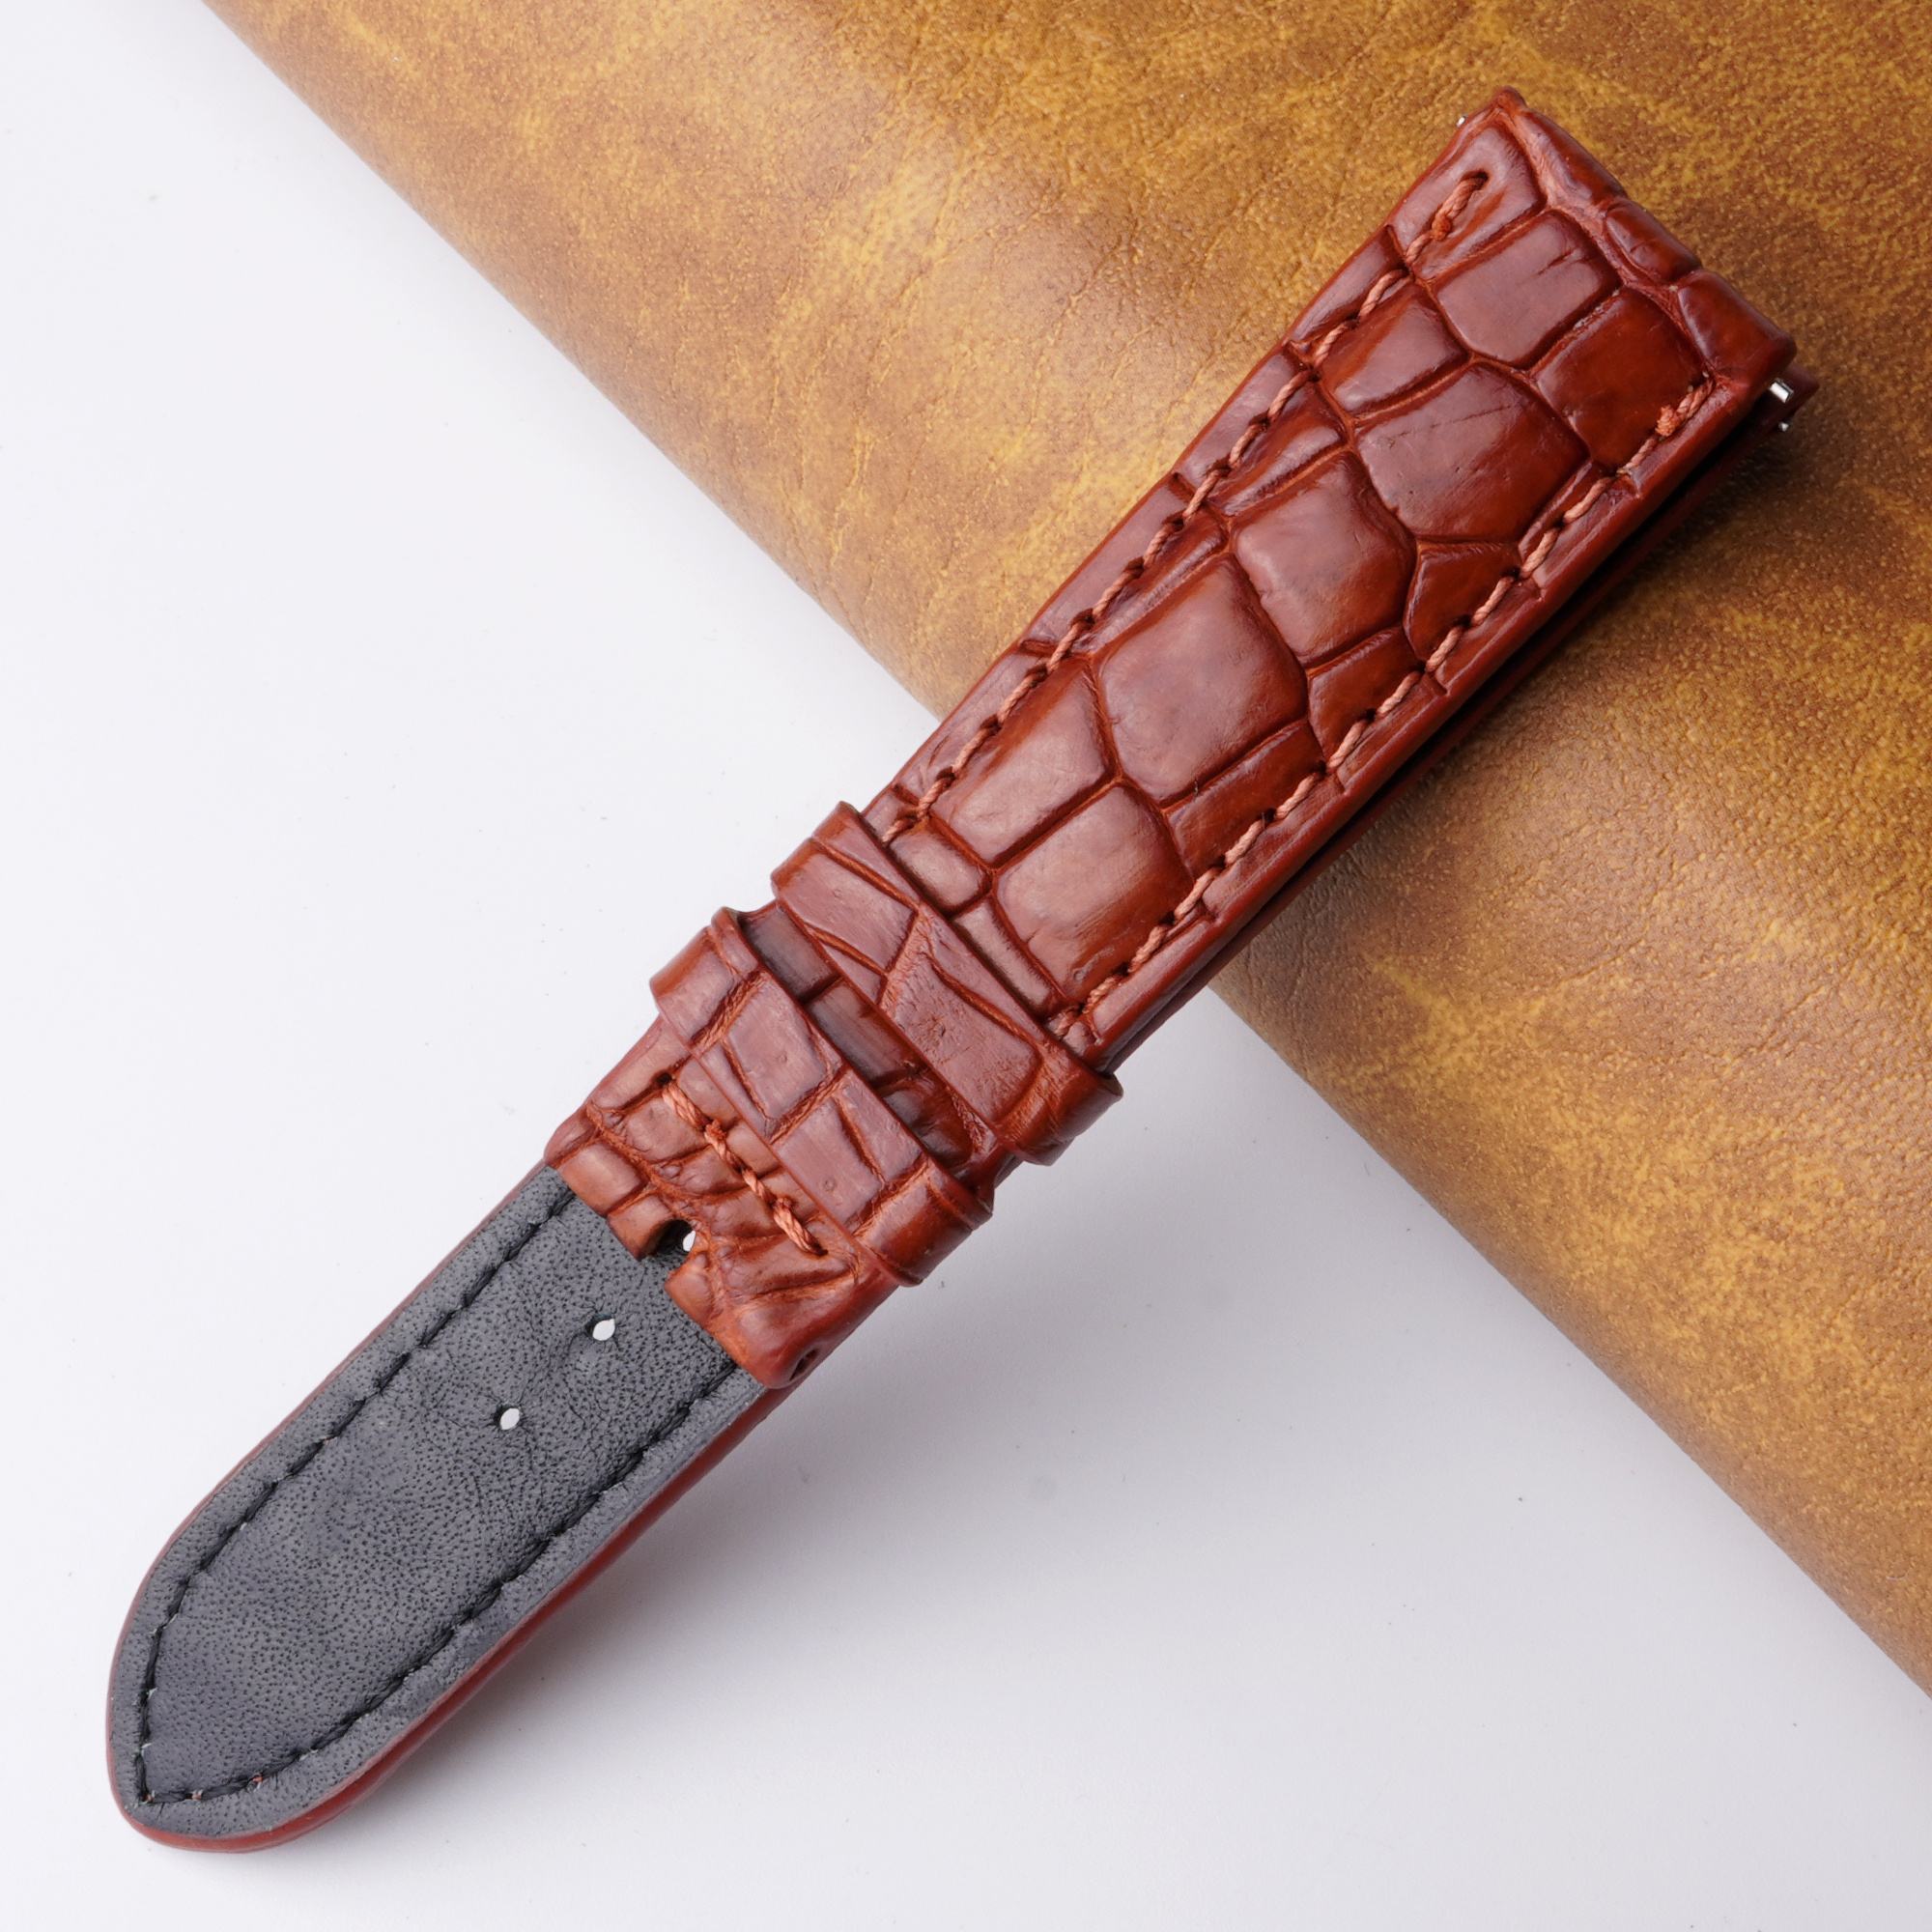 20mm Brown Unique Pattern Alligator Leather Watch Band For Men DH-227N